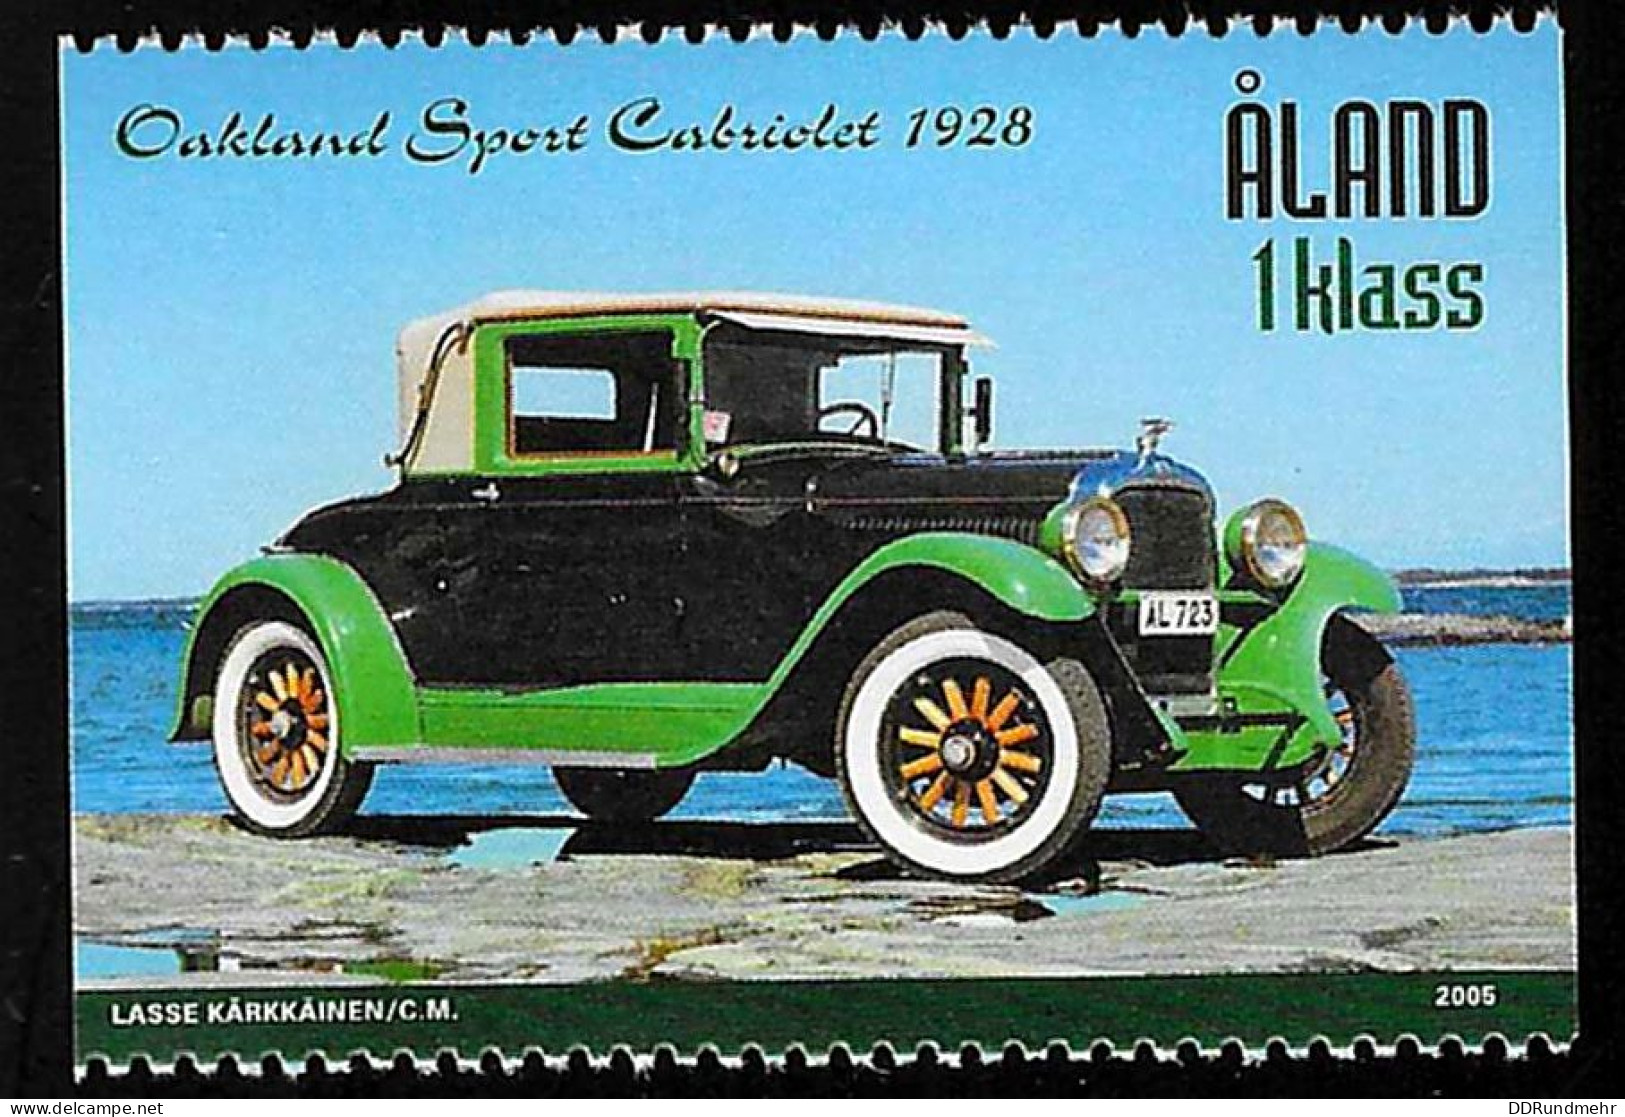 2005 Oldtimer Michel AX 247 Stamp Number AX 233a Yvert Et Tellier AX 247 Stanley Gibbons AX 262 Xx MNH - Aland